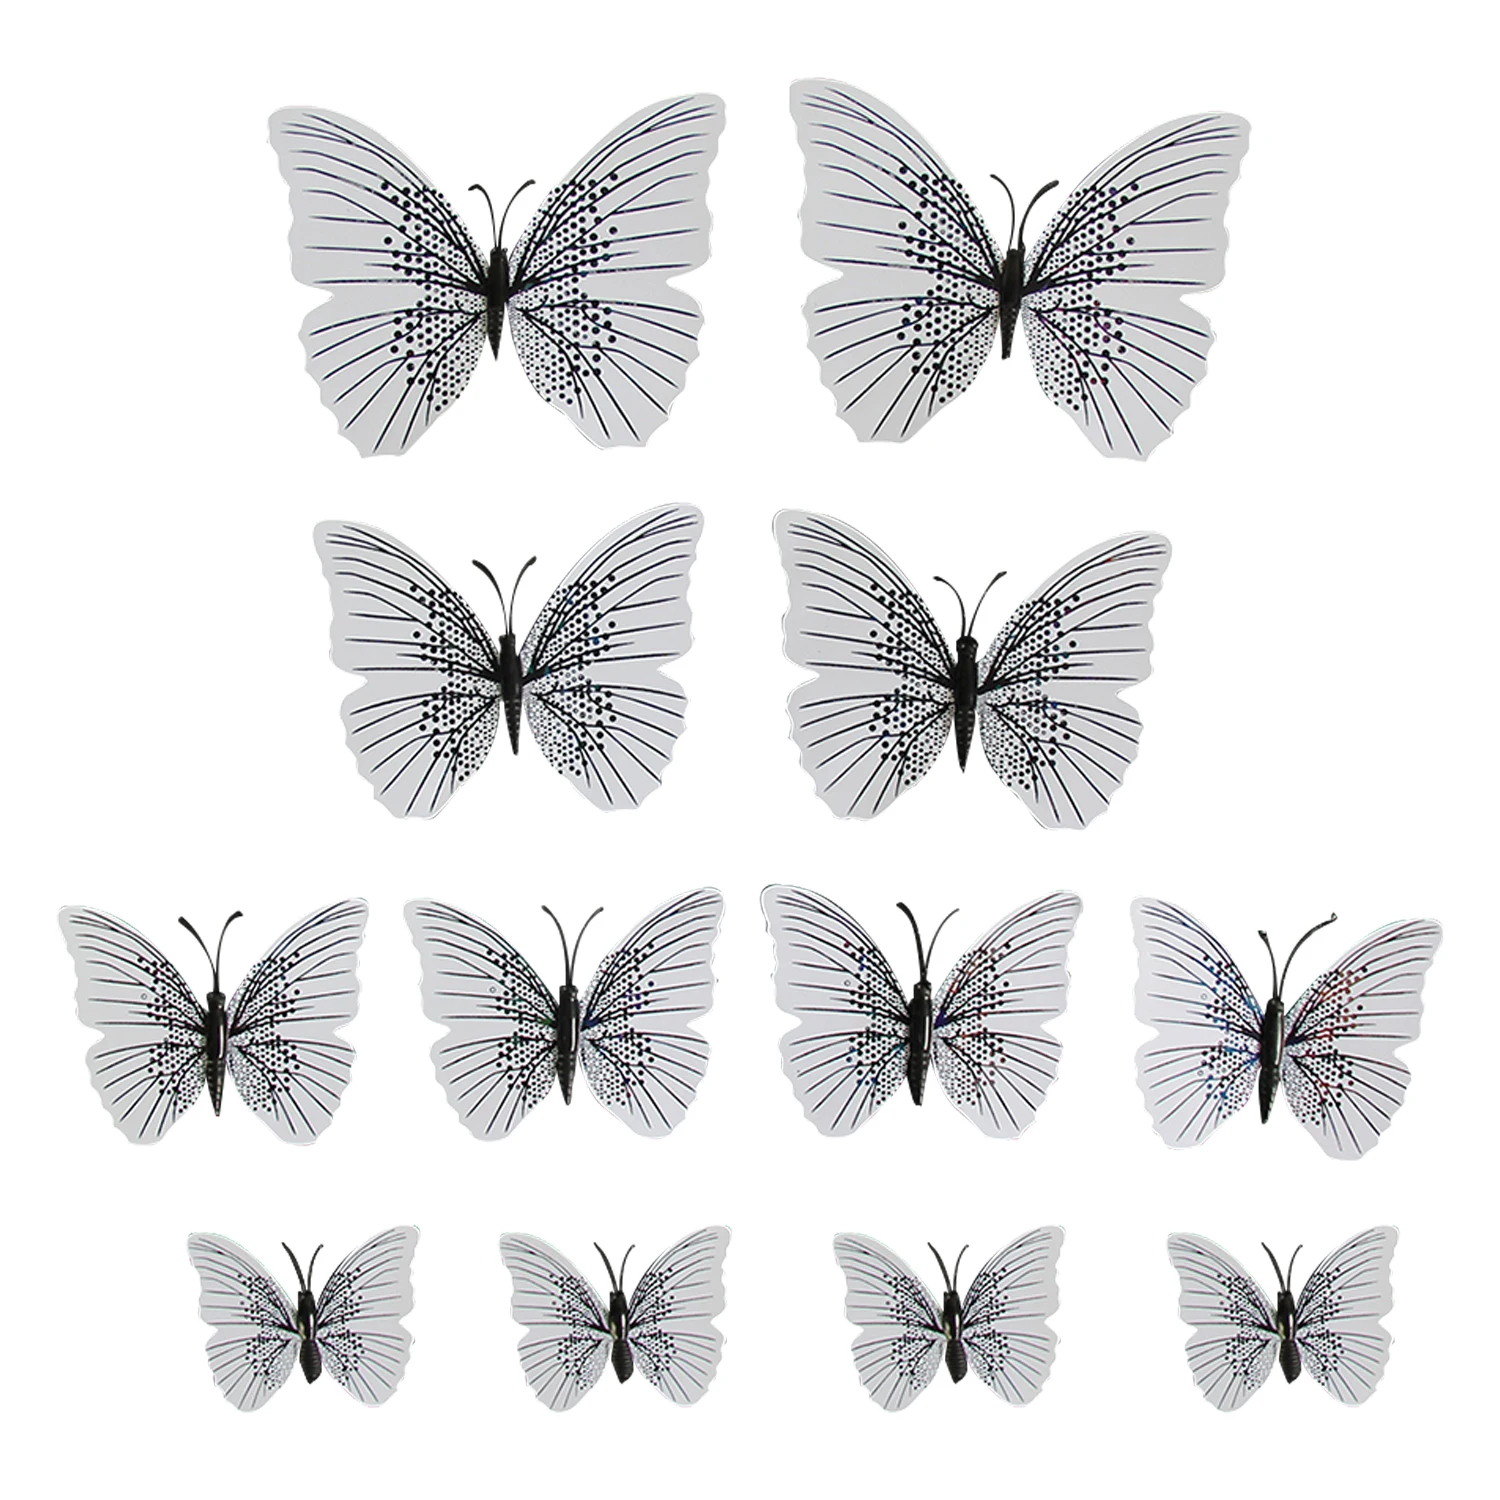 12Pcs Wall Stickers Colorful PVC Butterfly Shape Wall Decal Sticker Home Living Room Refrigerator Stickers DIY Art Decoration - Цвет: Черный